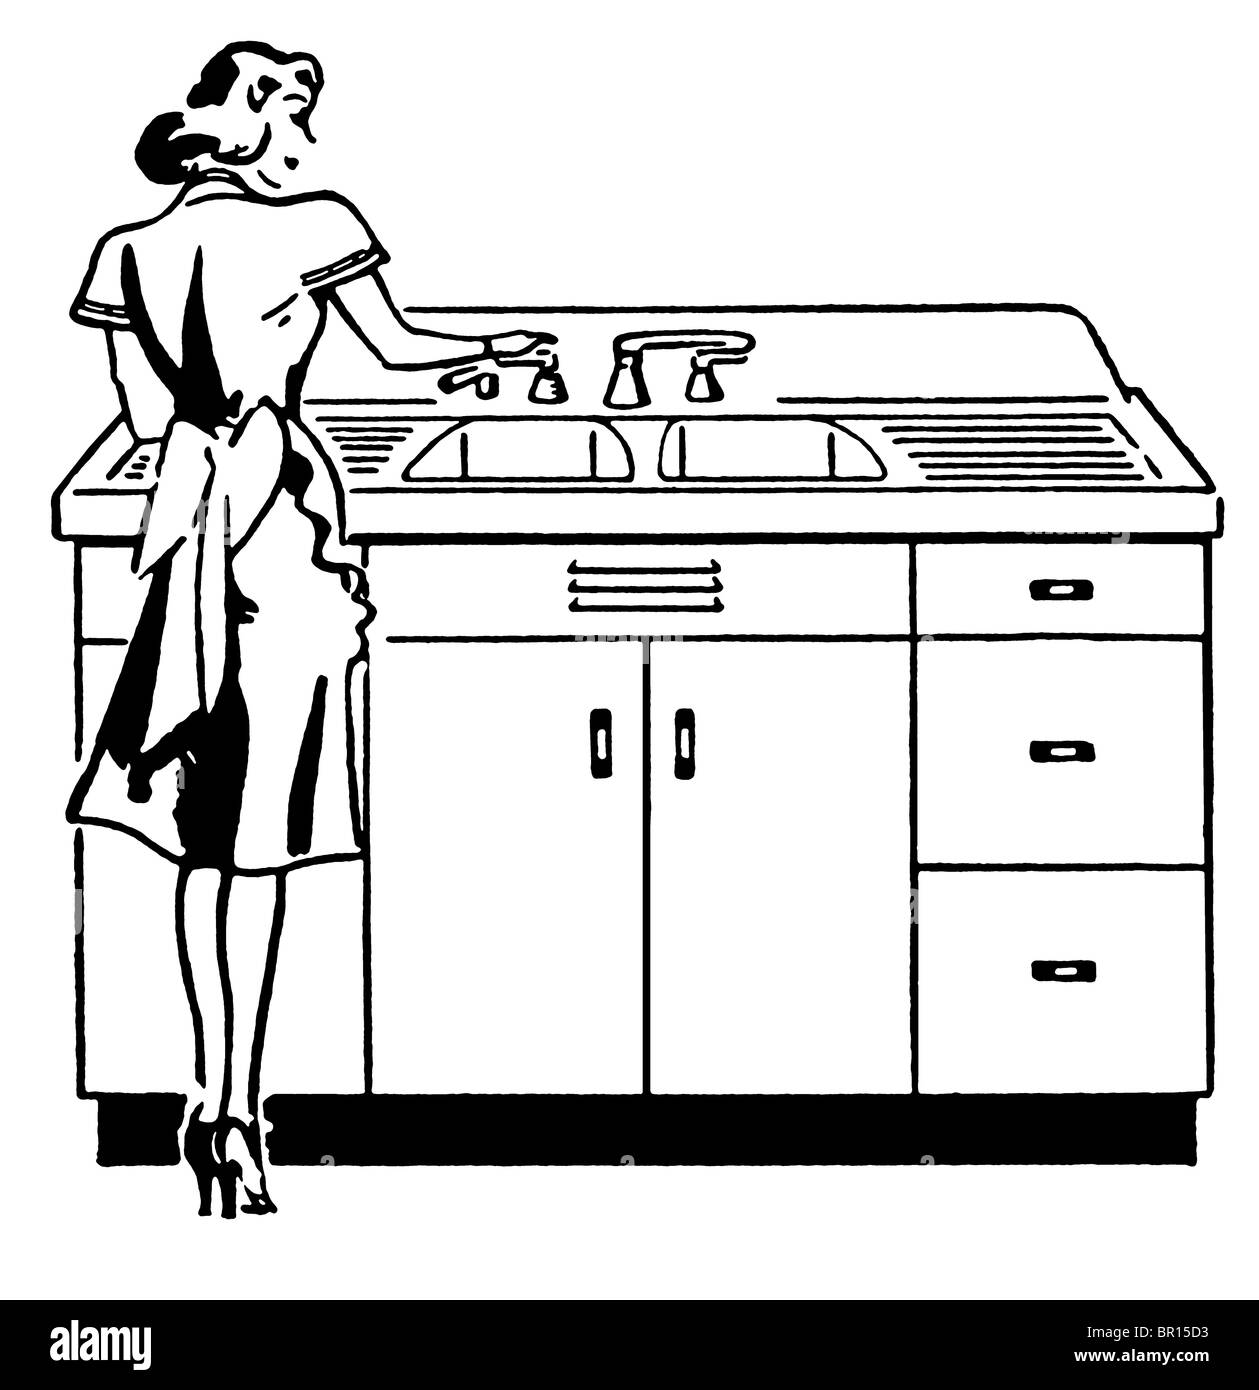 https://c8.alamy.com/comp/BR15D3/a-black-and-white-version-of-a-vintage-illustration-of-a-woman-washing-BR15D3.jpg